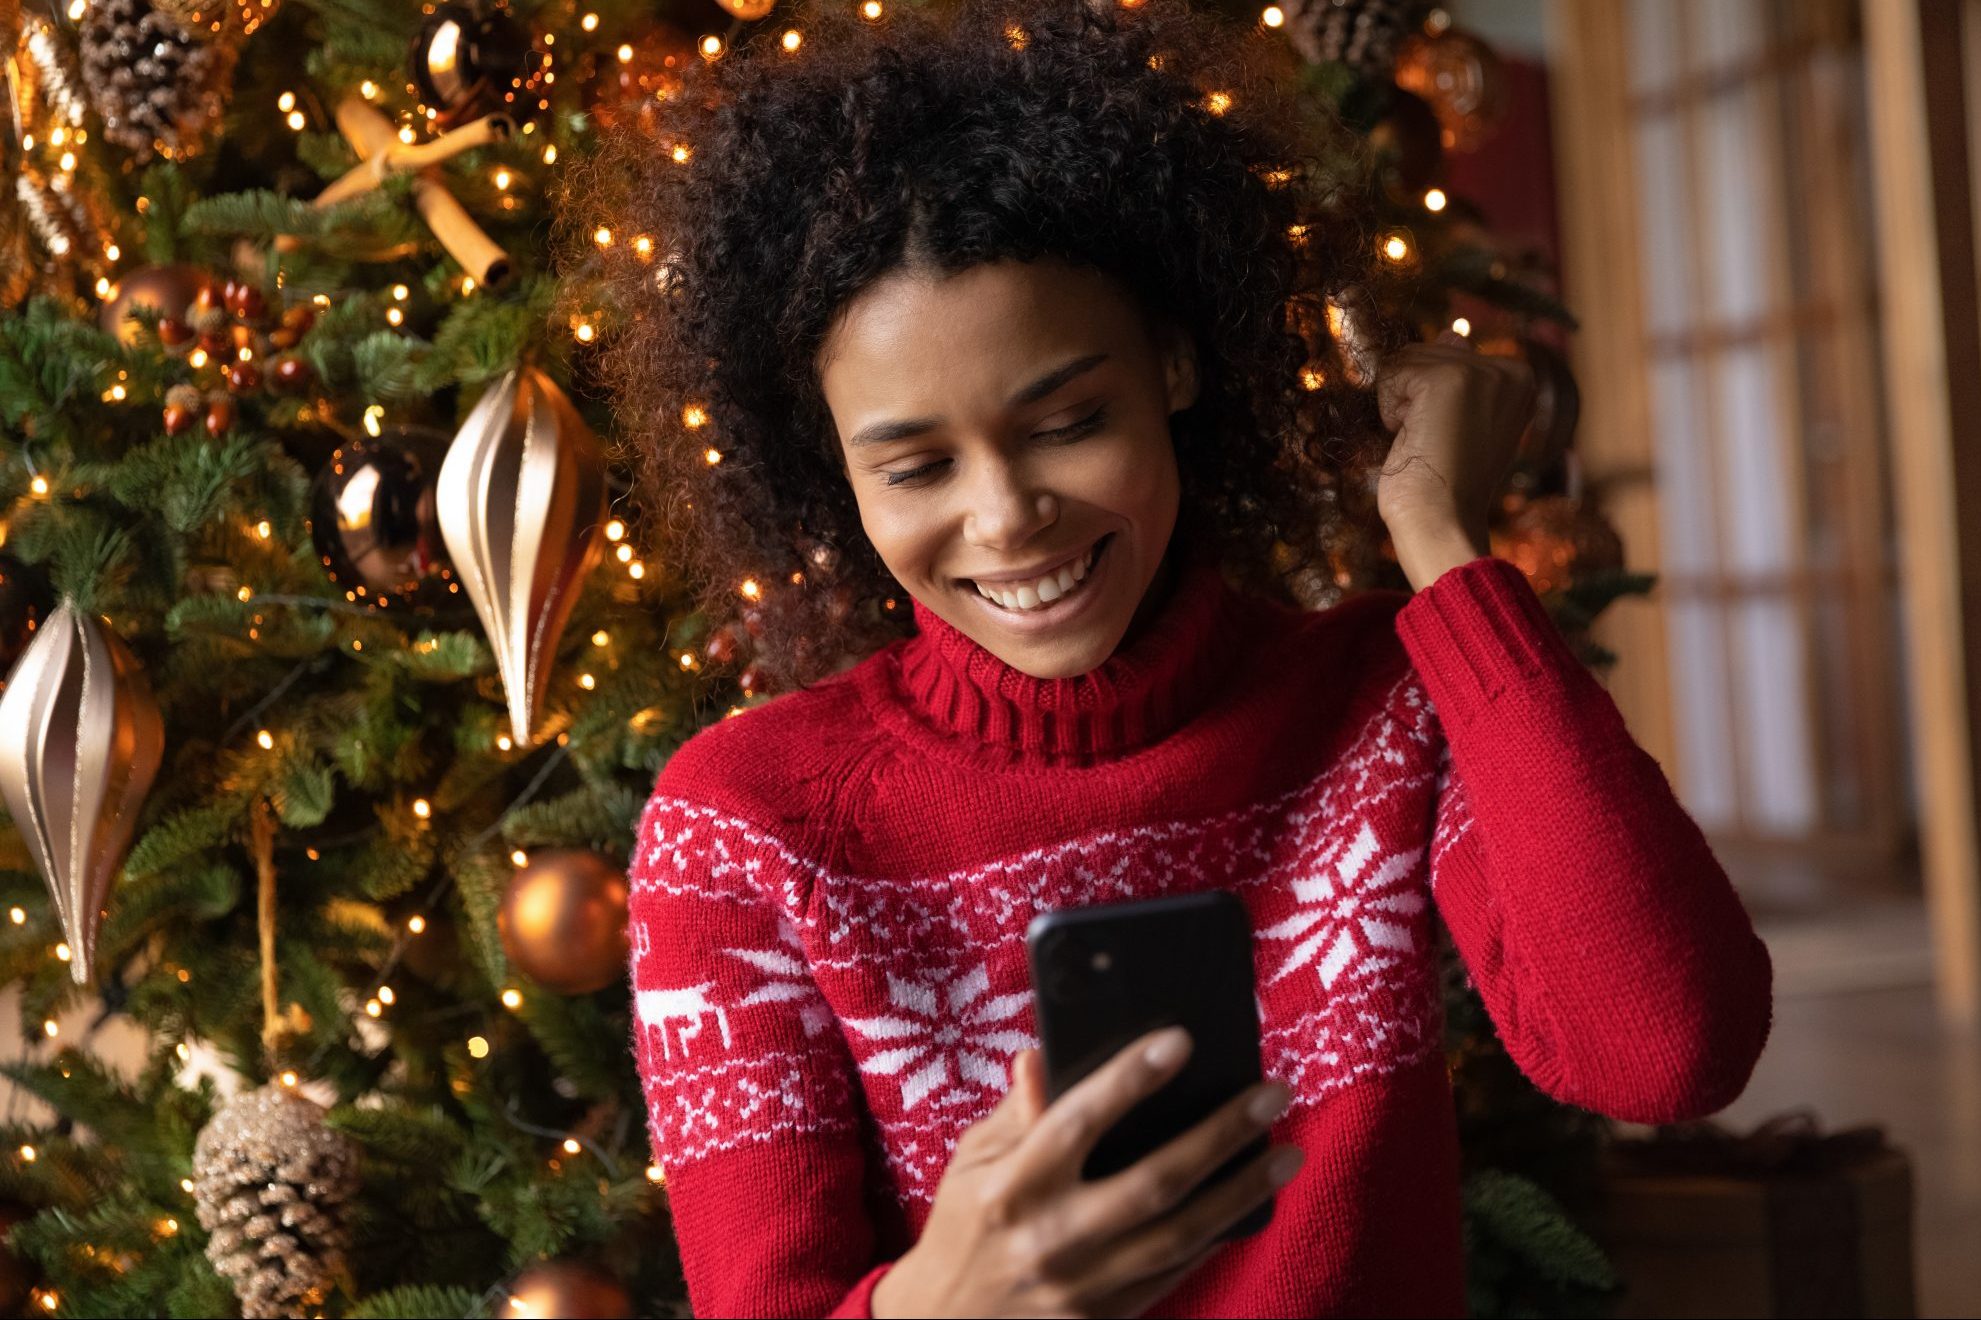 Young woman in red Christmas jumper smiling at smartphone